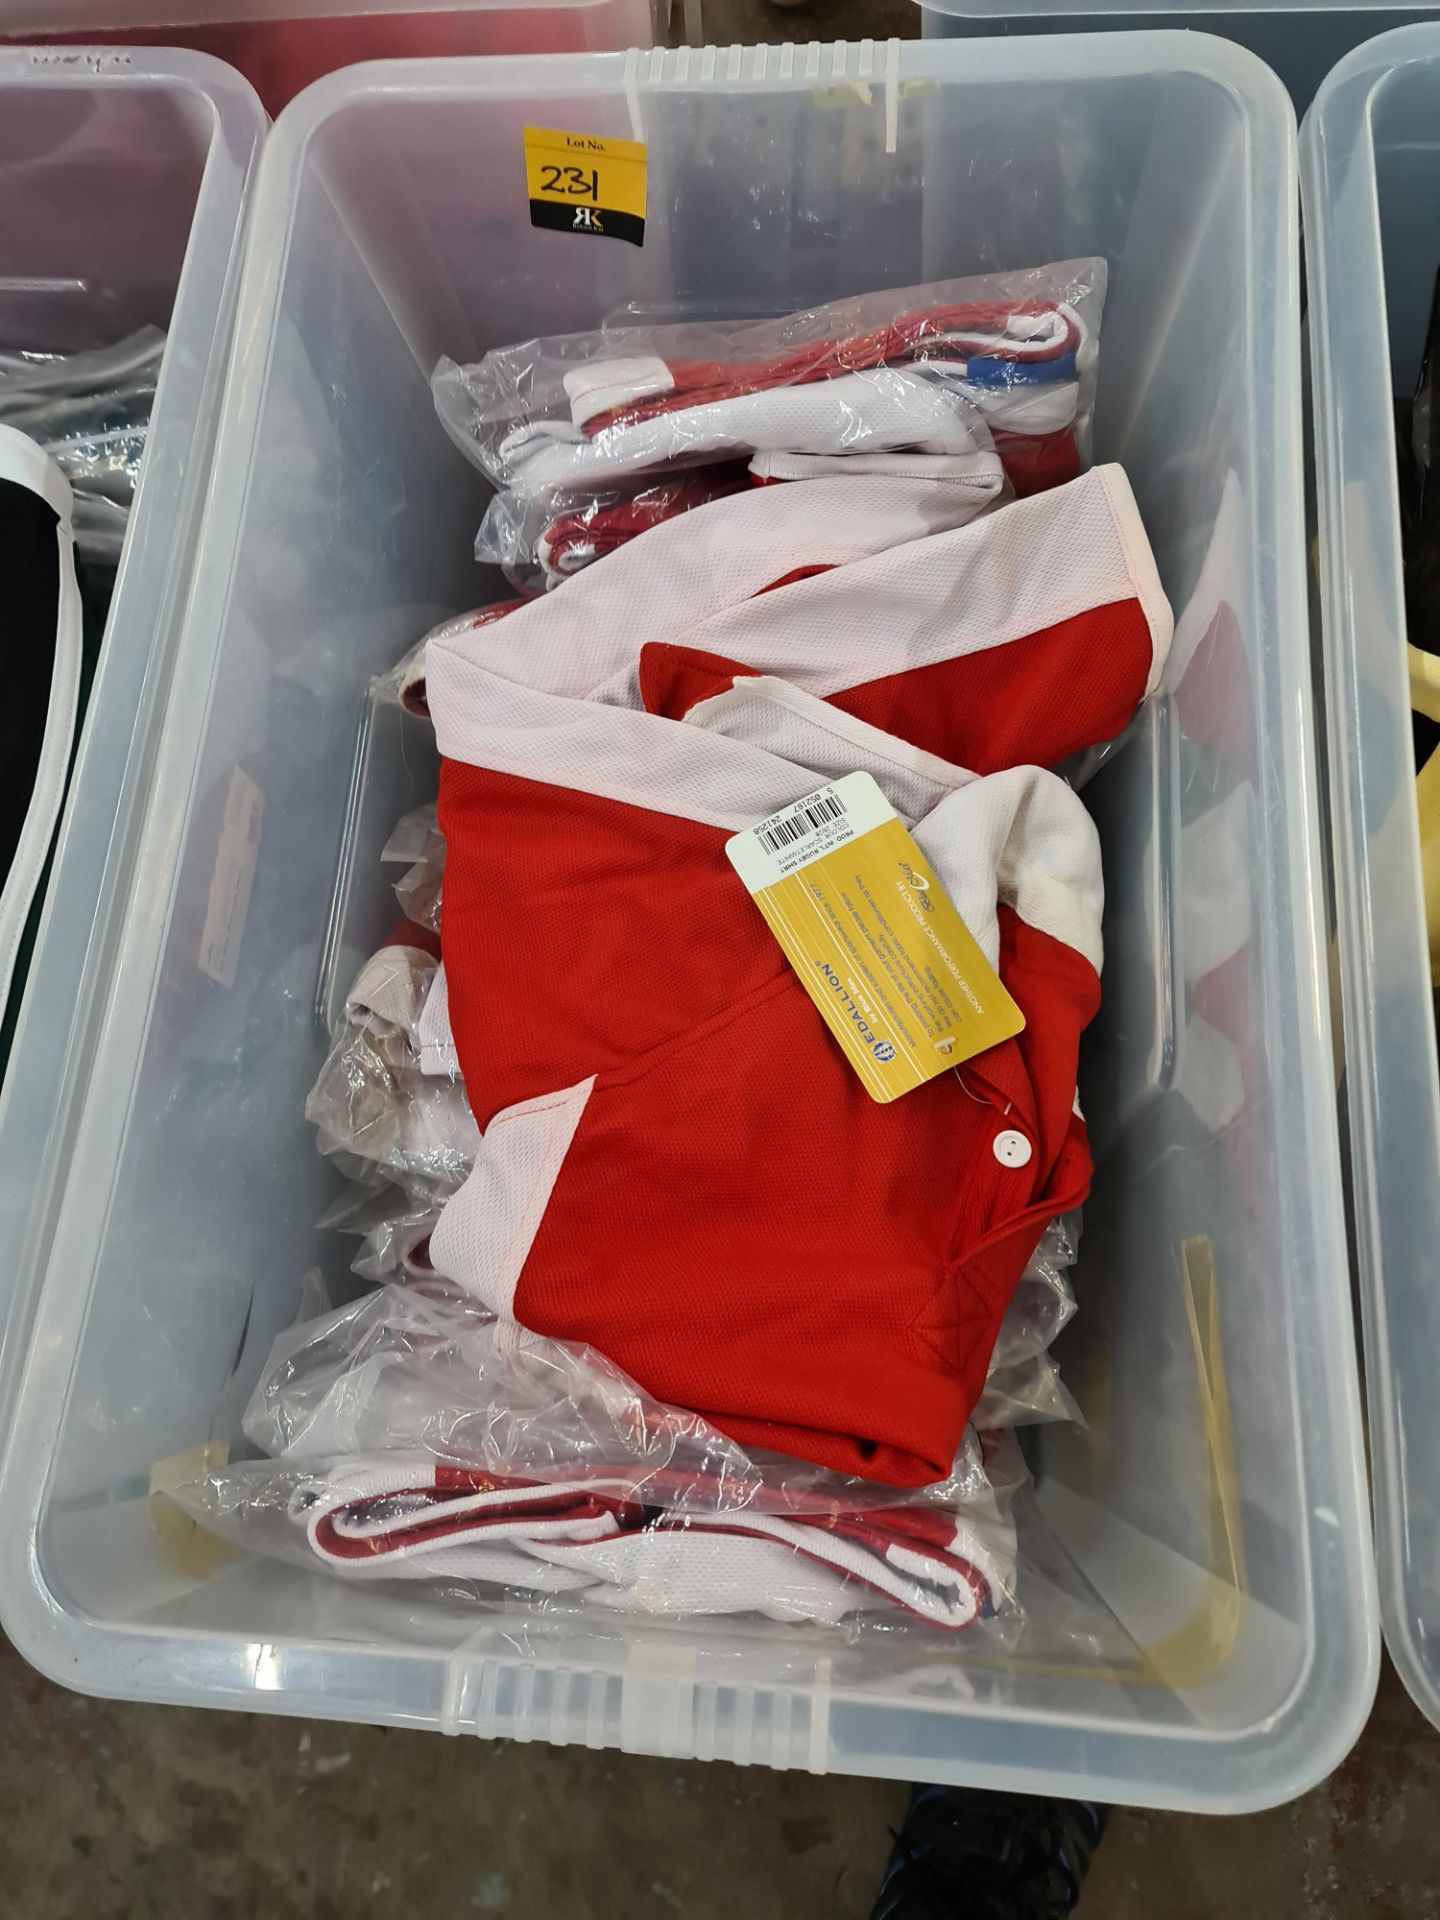 17 off red and white childrens rugby tops - Image 2 of 2